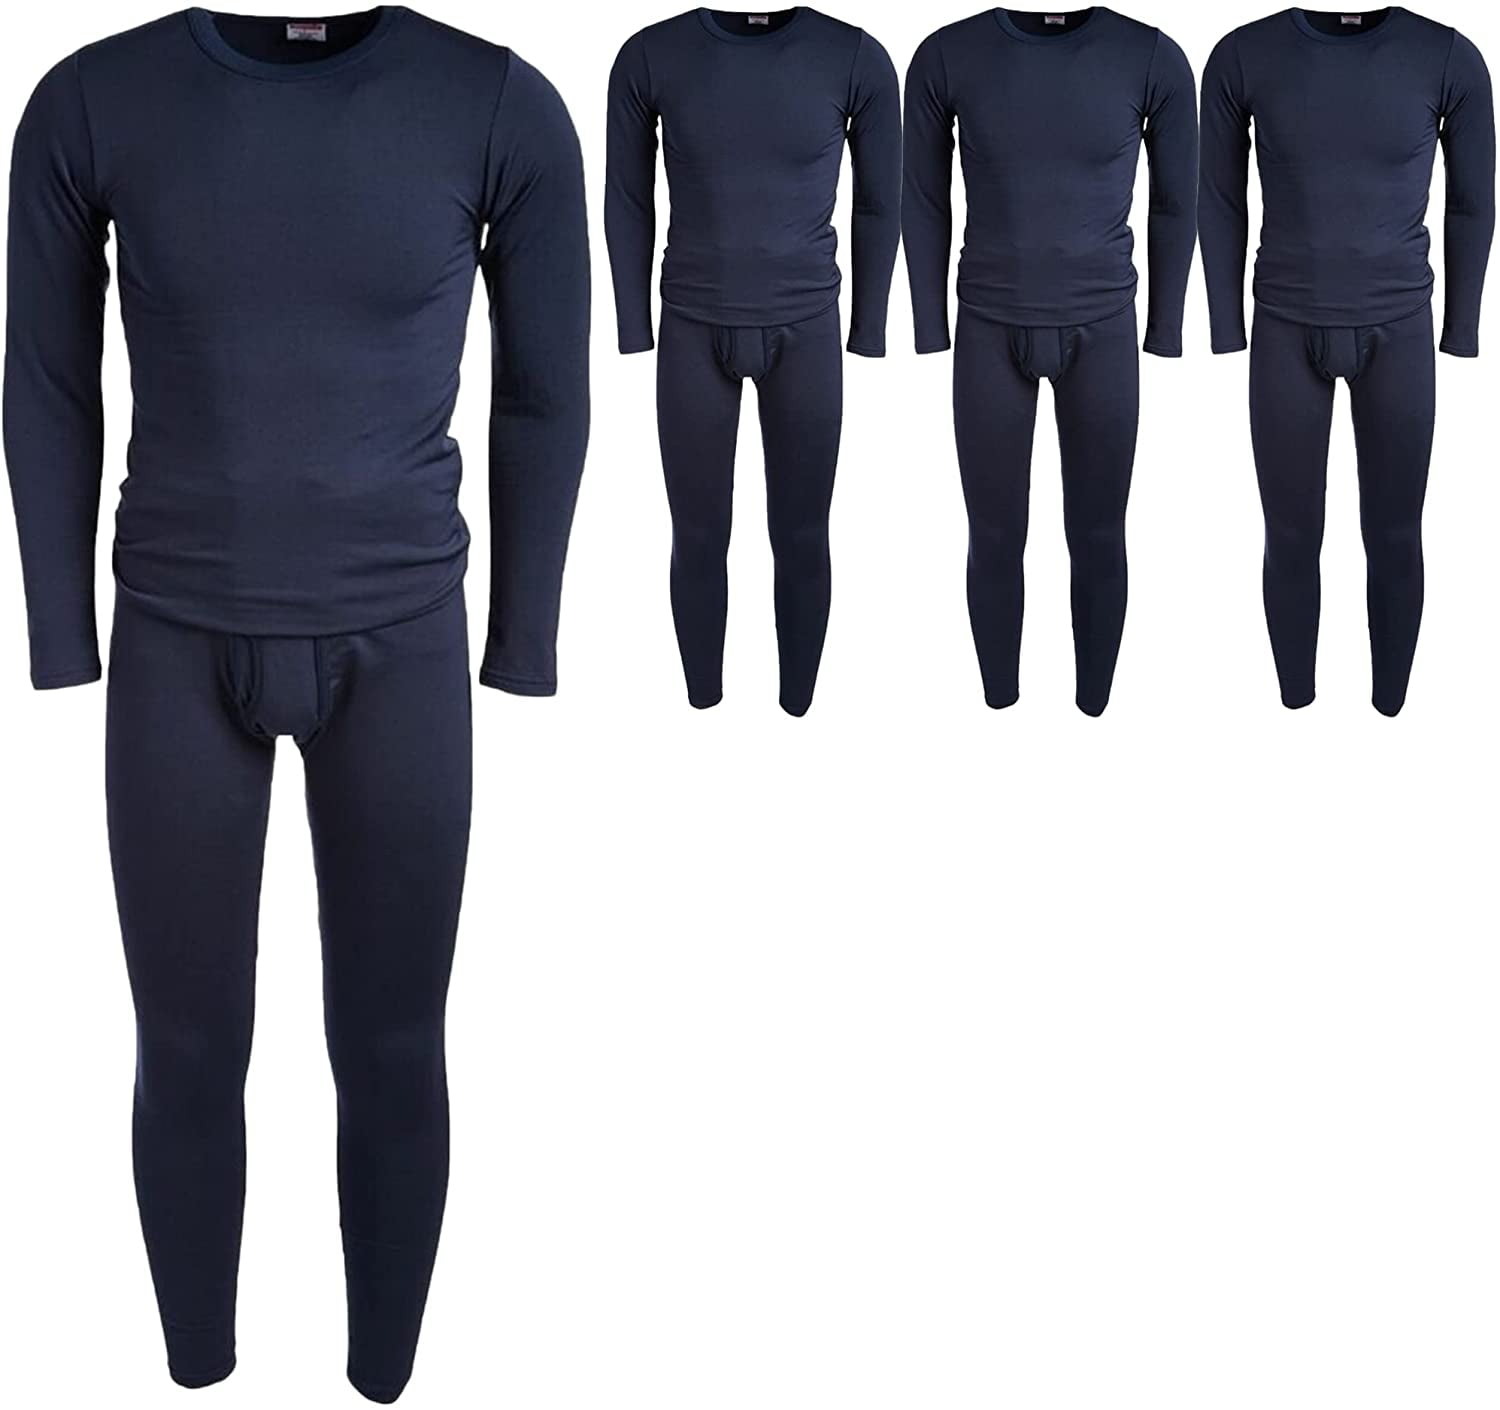 3 Pack of 2pc Thermal Sets for Men, Base Layer Long Johns Underwear, Top &  Bottom, Cotton, Solid Colors (X-Large, Navy Blue)